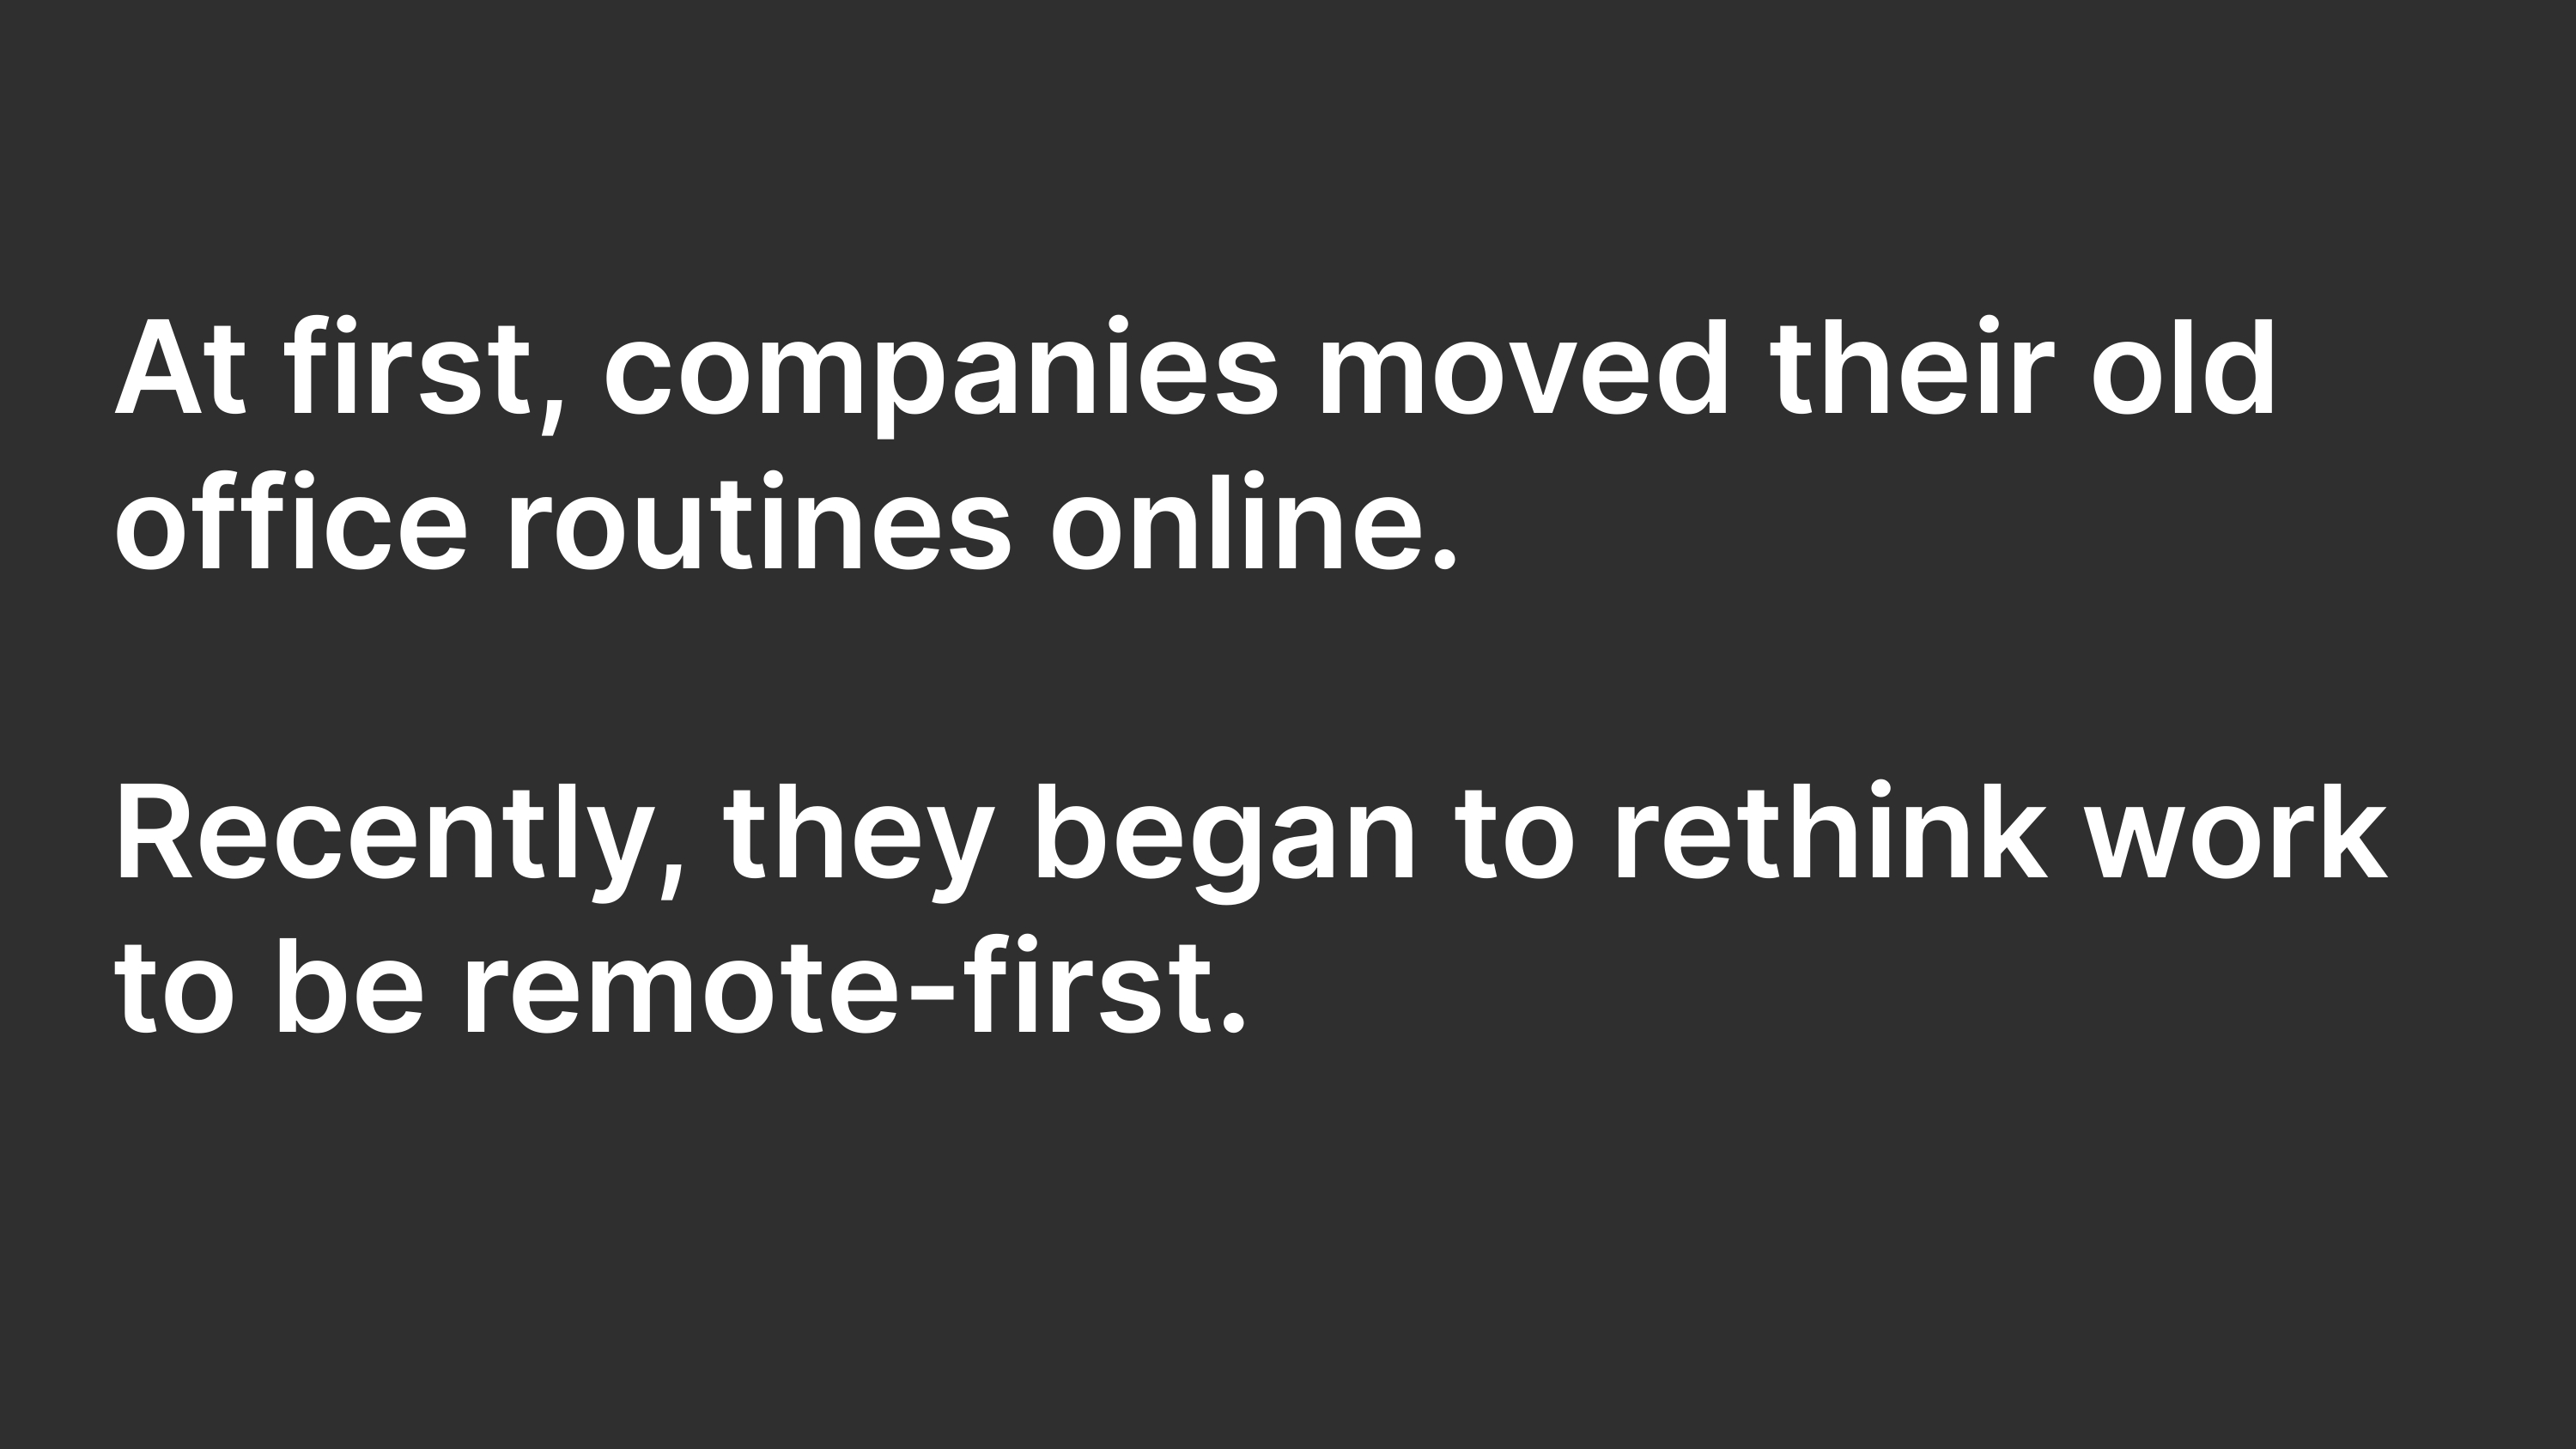 At first, companies moved their old office routines online. Recently, they began to rethink work to be remote-first.